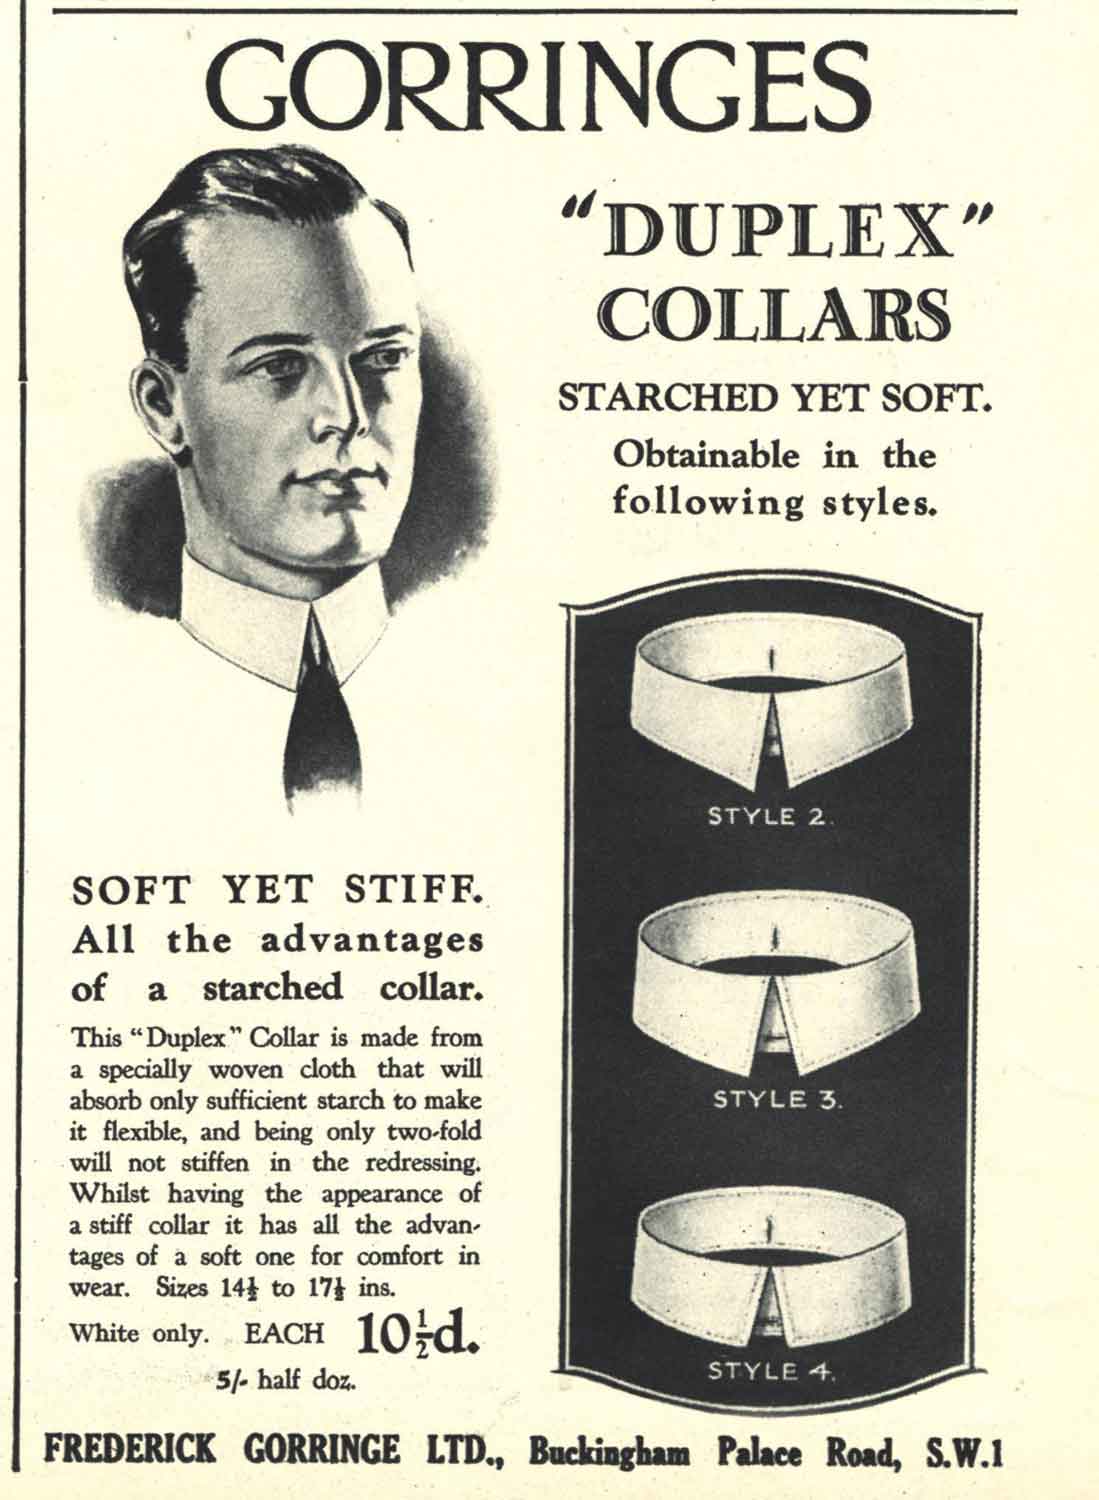 A 1920s ad for detachable collars